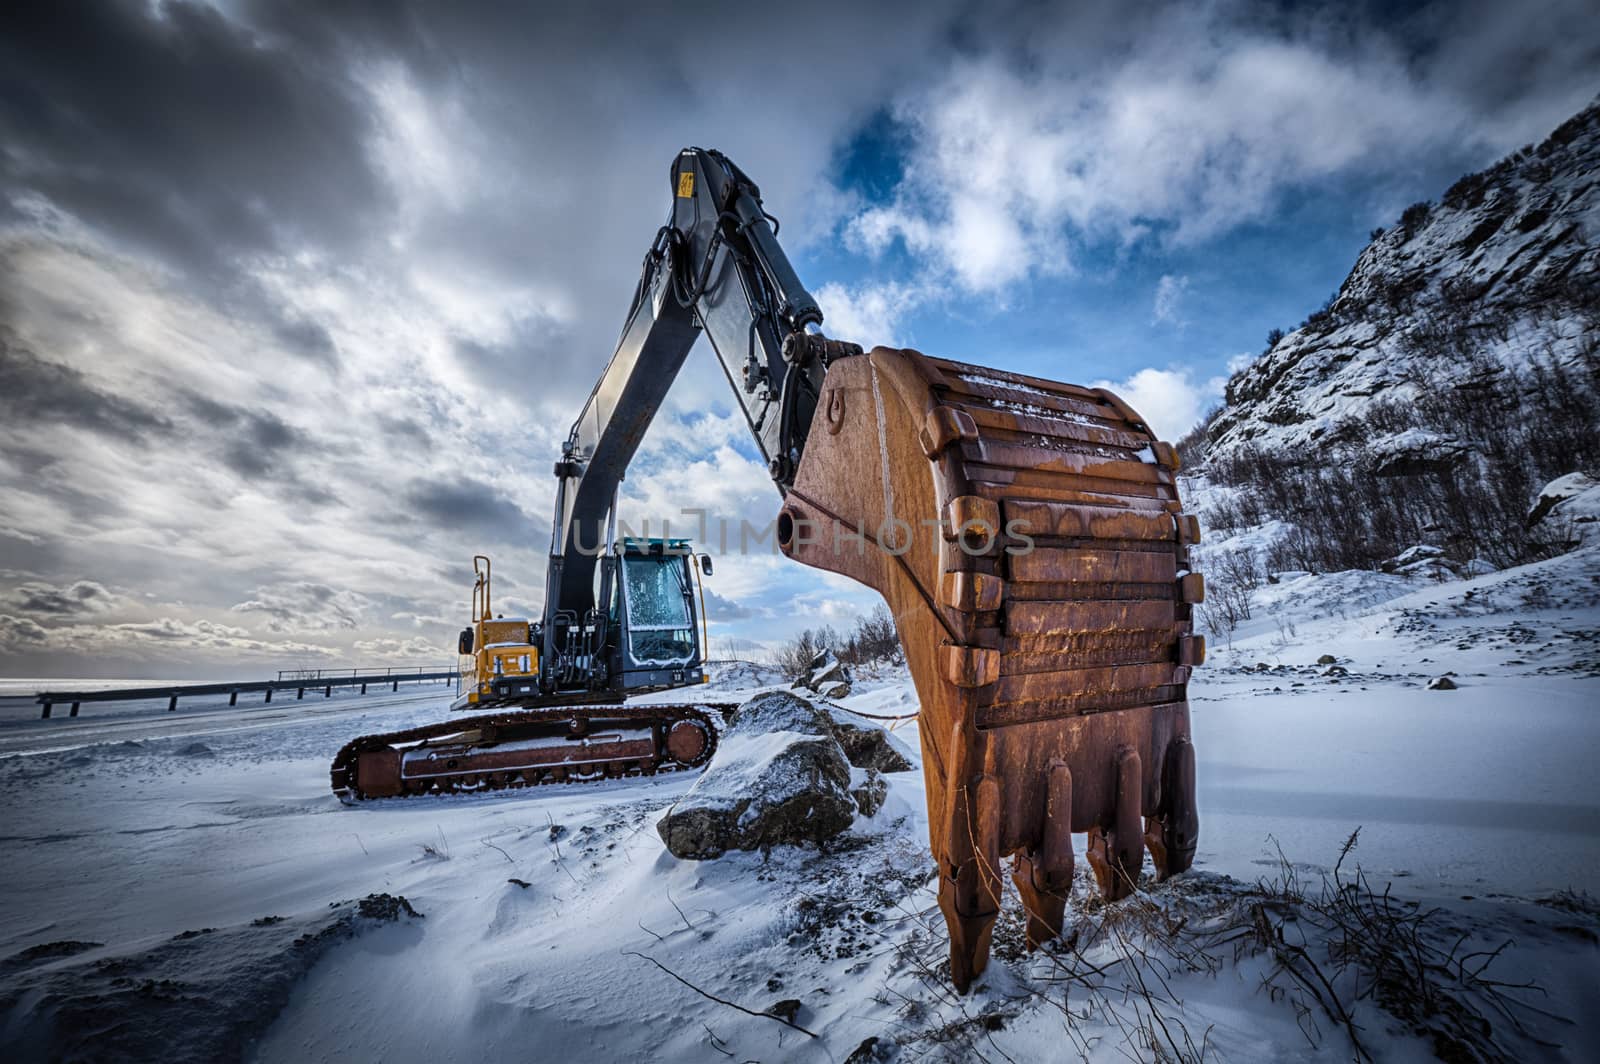 Old excavator in winter by dimol